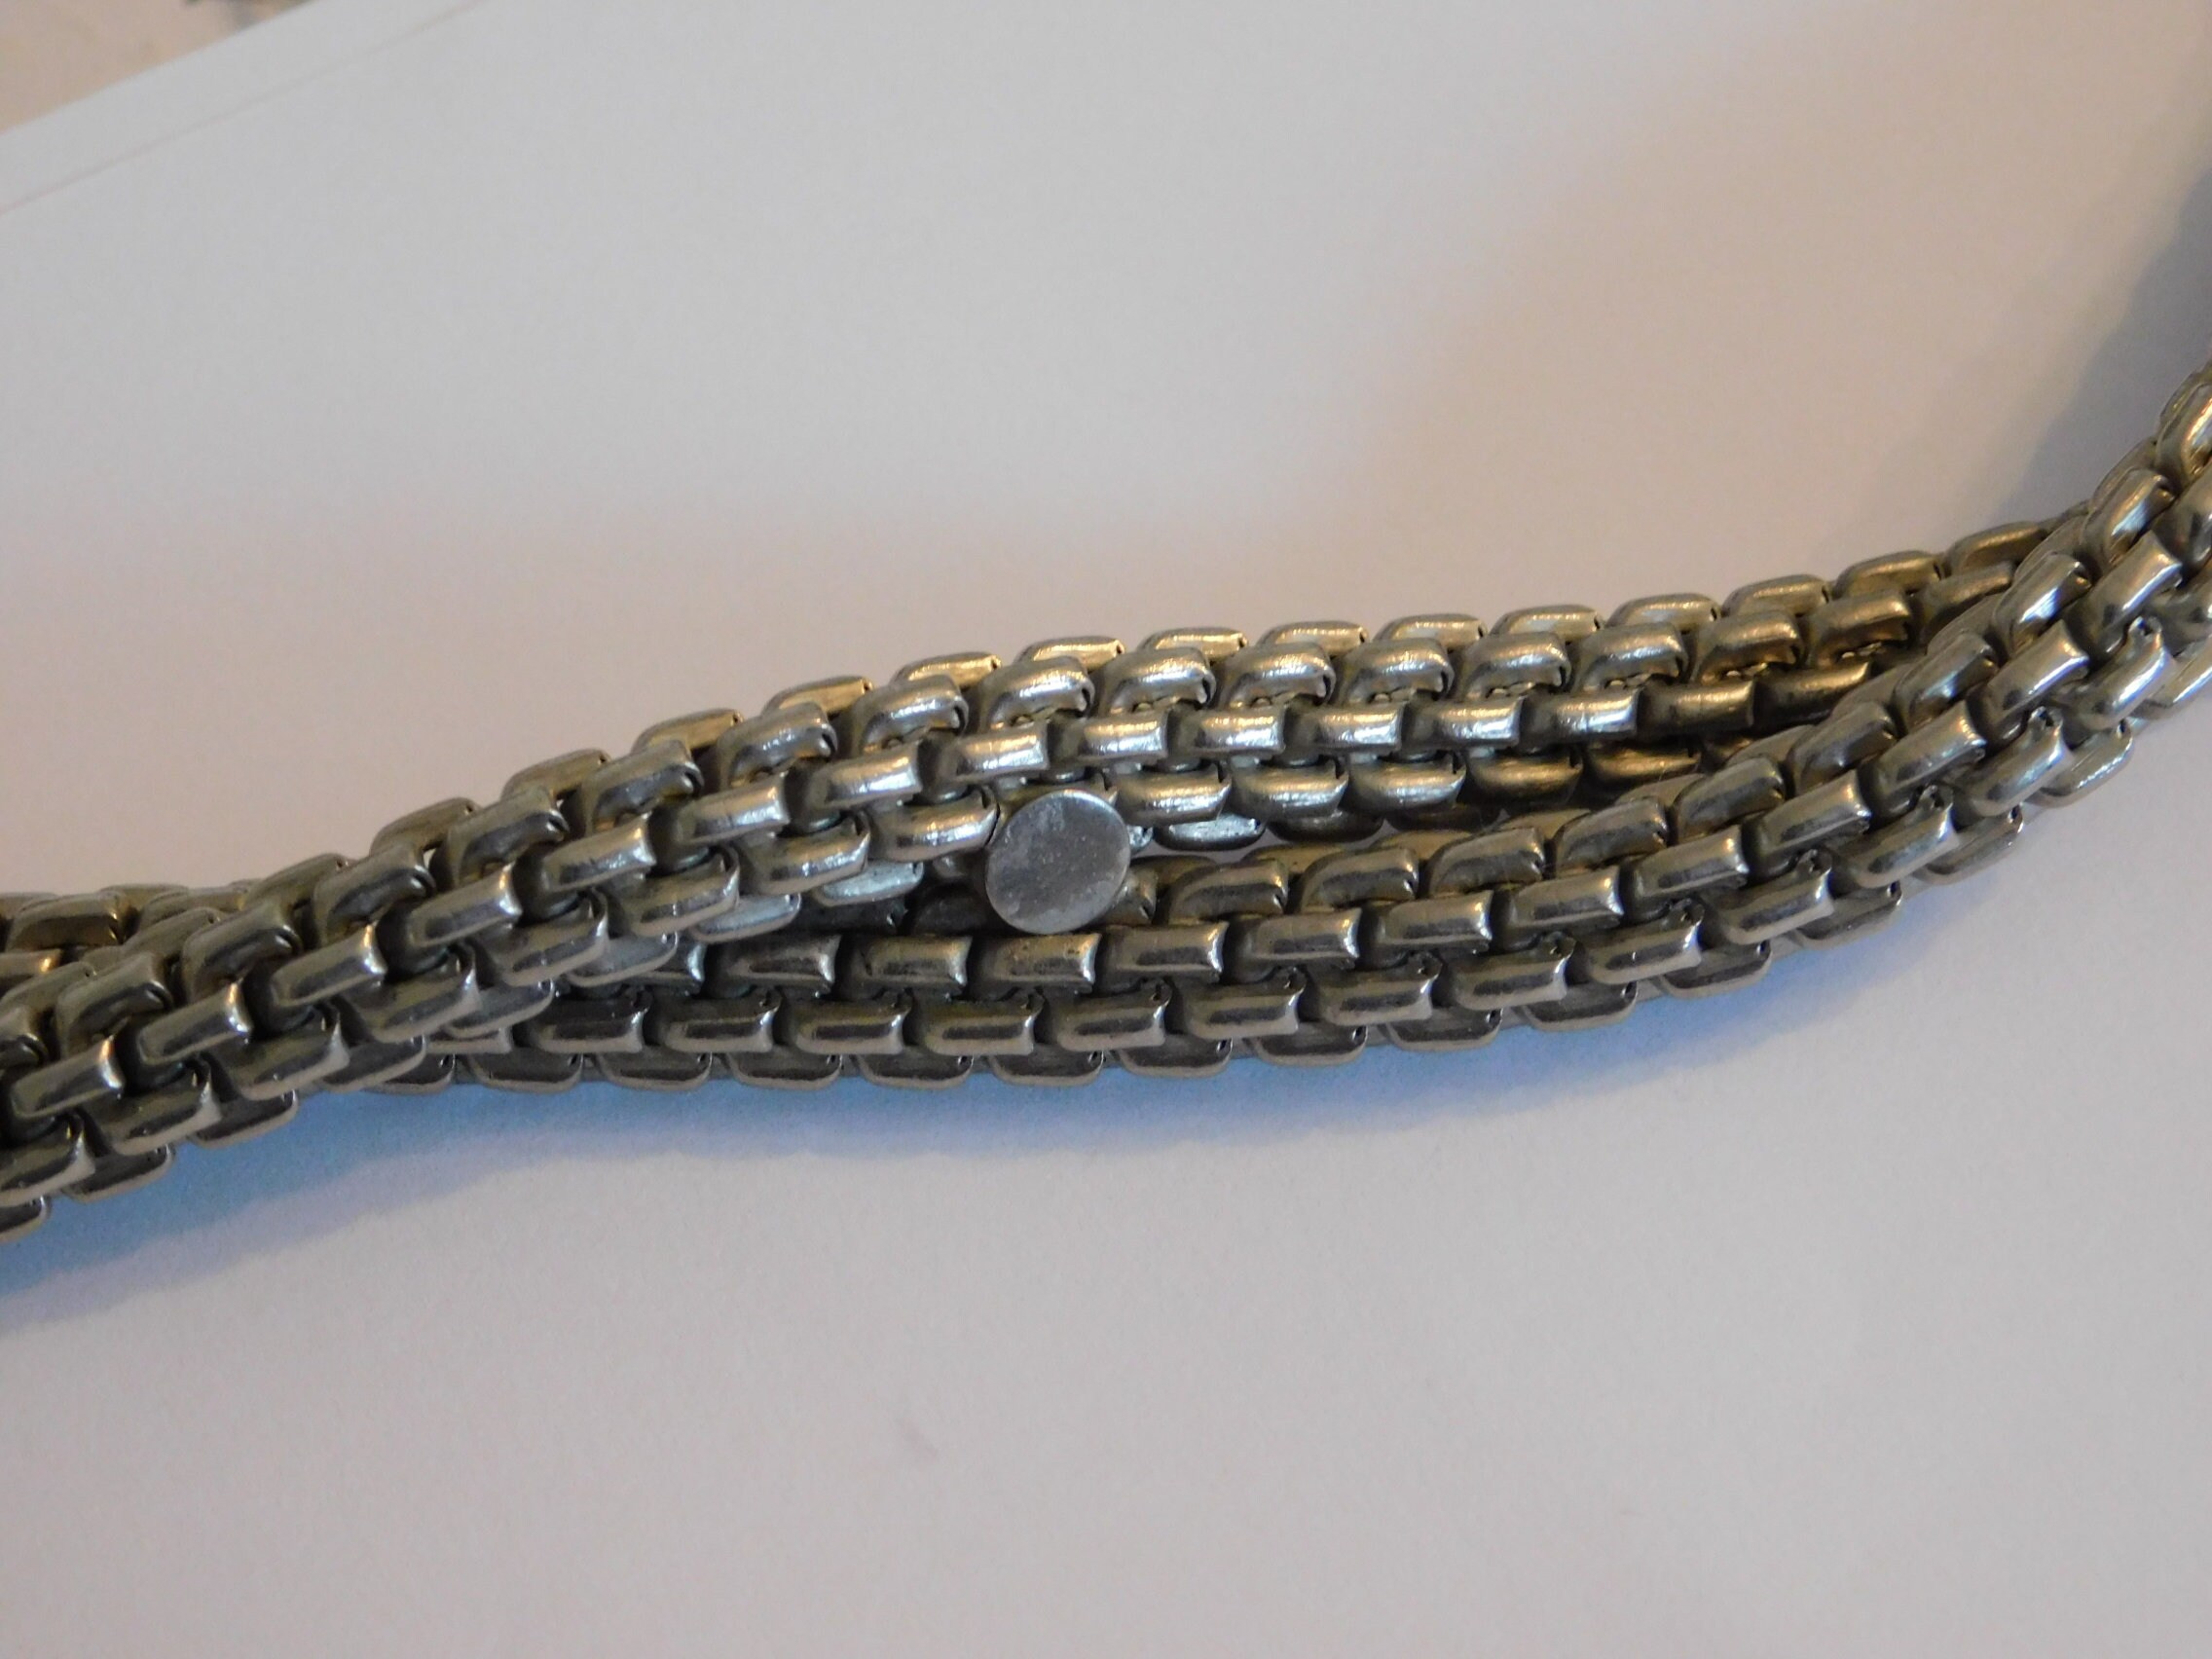 Quality Belt Vintage Double Twisted Rope Chain in Silver Metal Selling for Charity